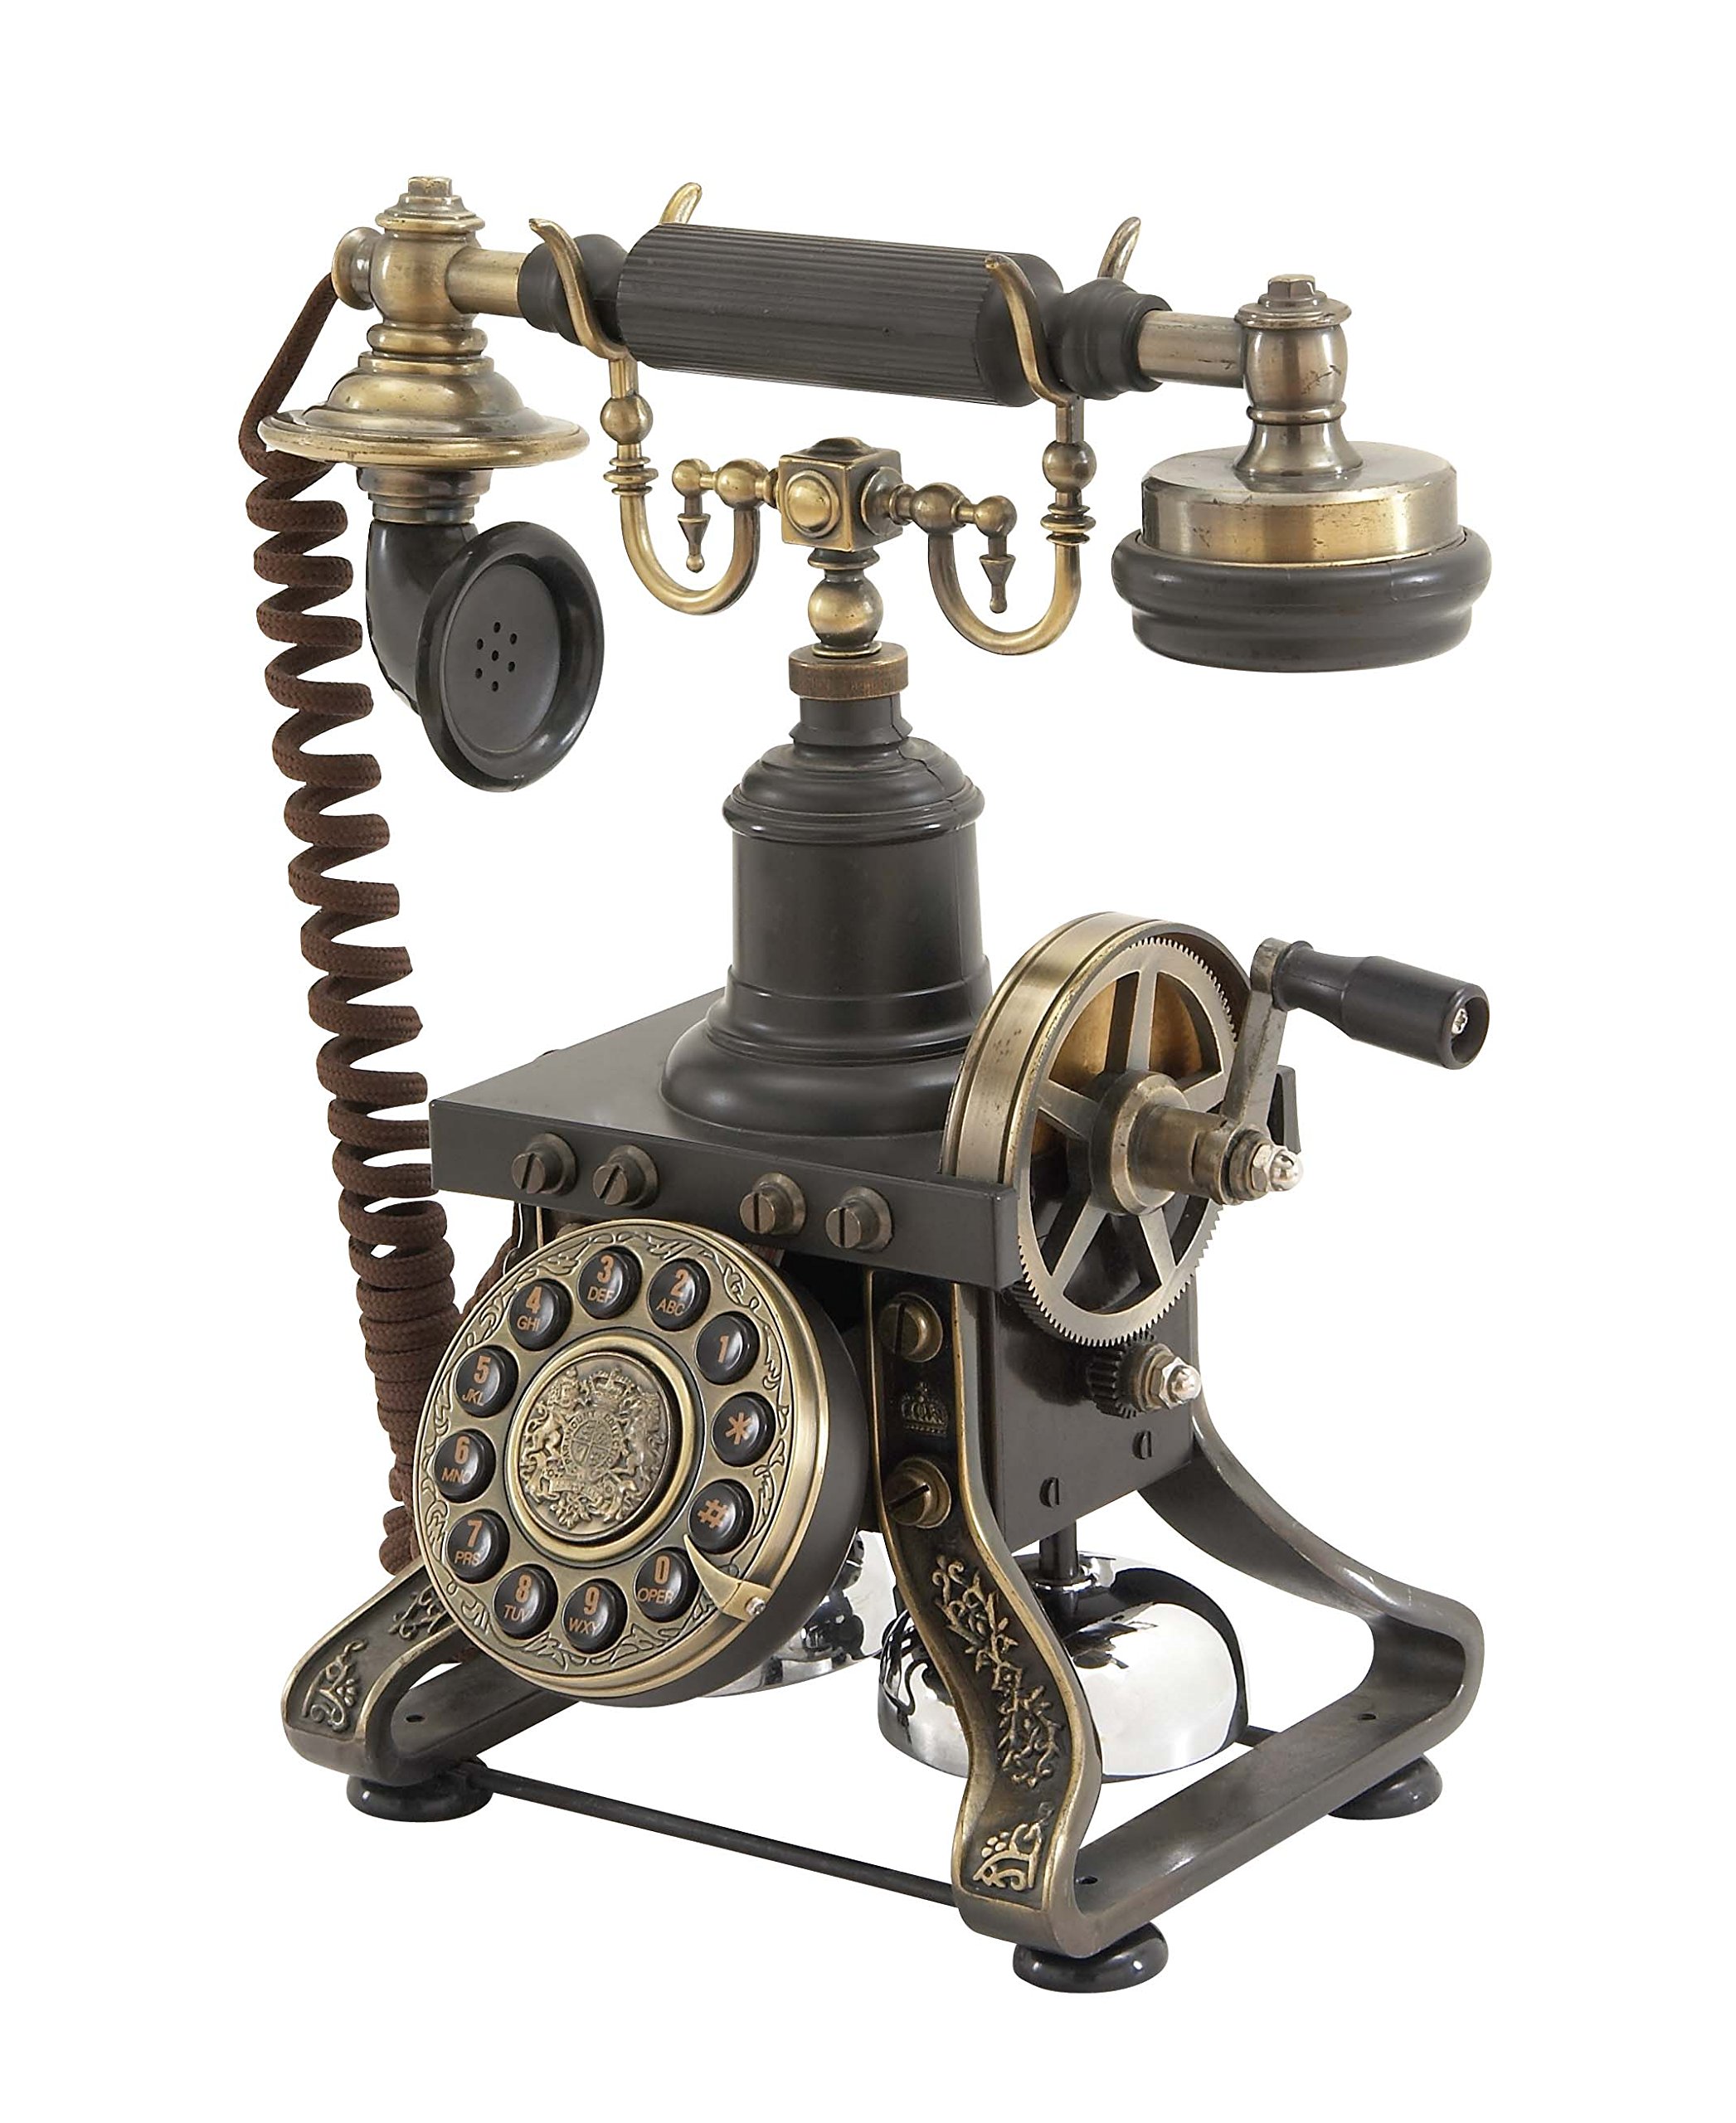 Deco 79 Brass Functioning Vintage Style Telephone with Line Cord, 10